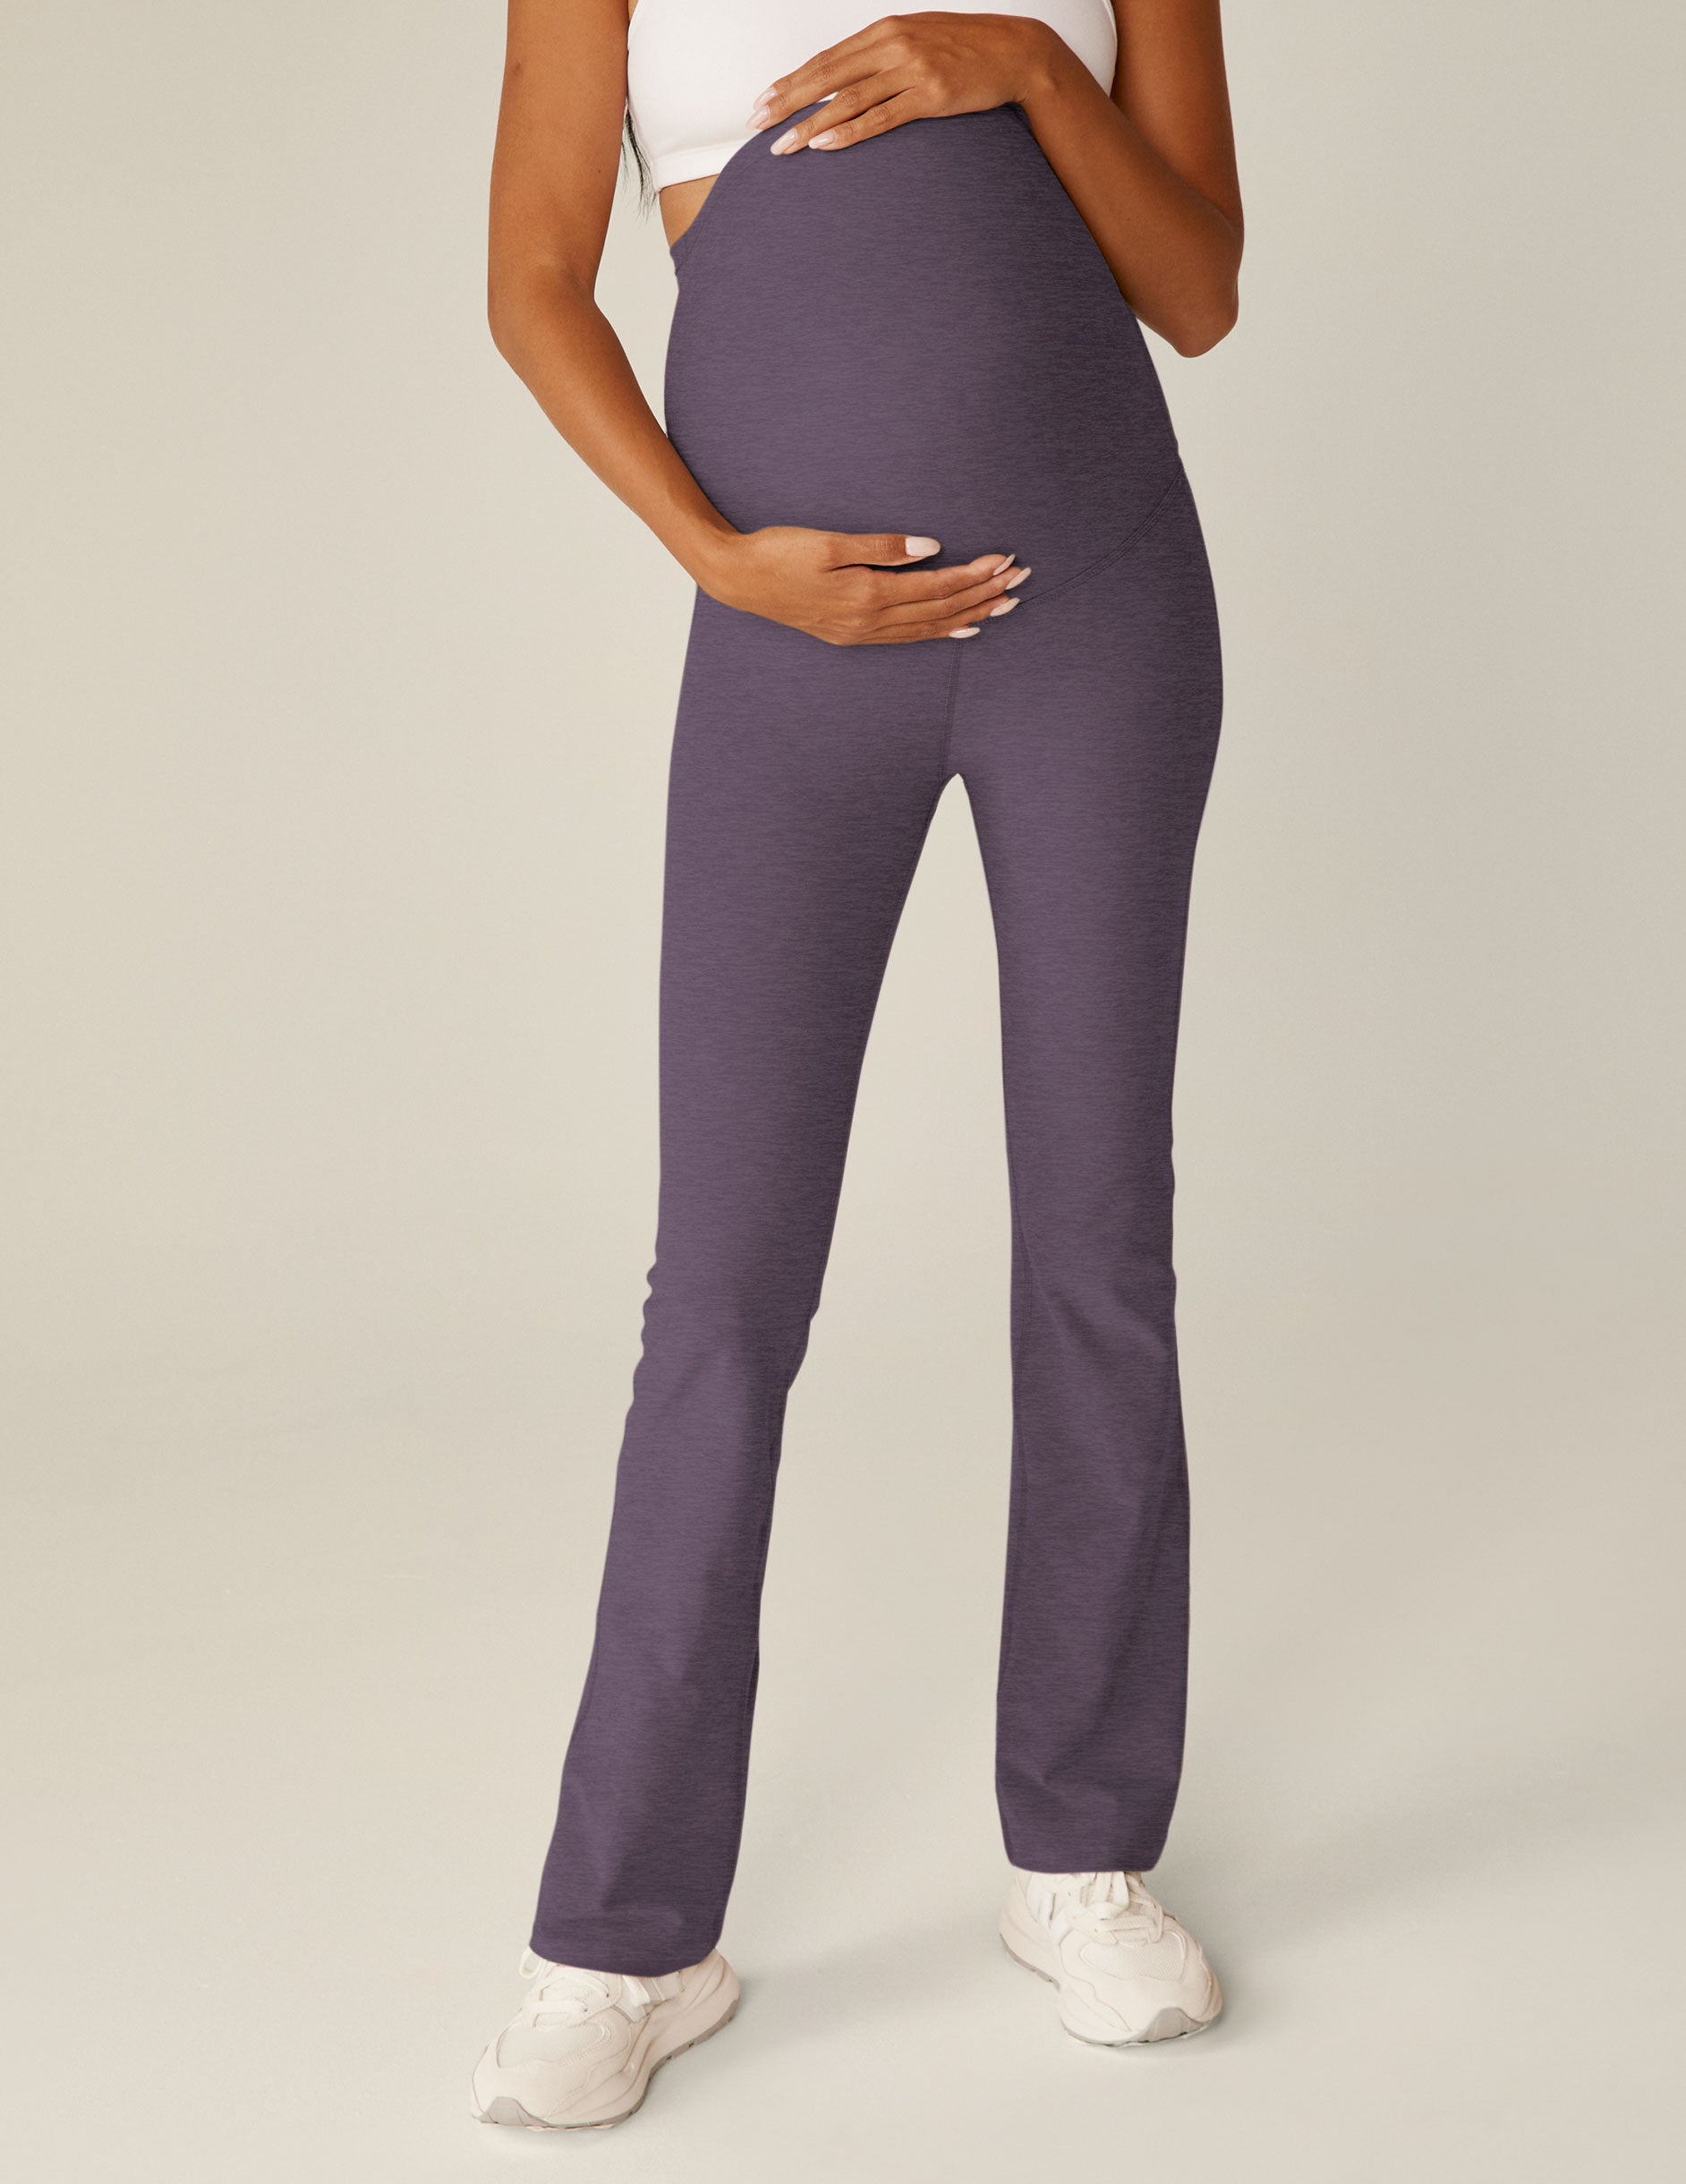 Mamma S Maternity Womens Jeans - Buy Mamma S Maternity Womens Jeans Online  at Best Prices In India | Flipkart.com